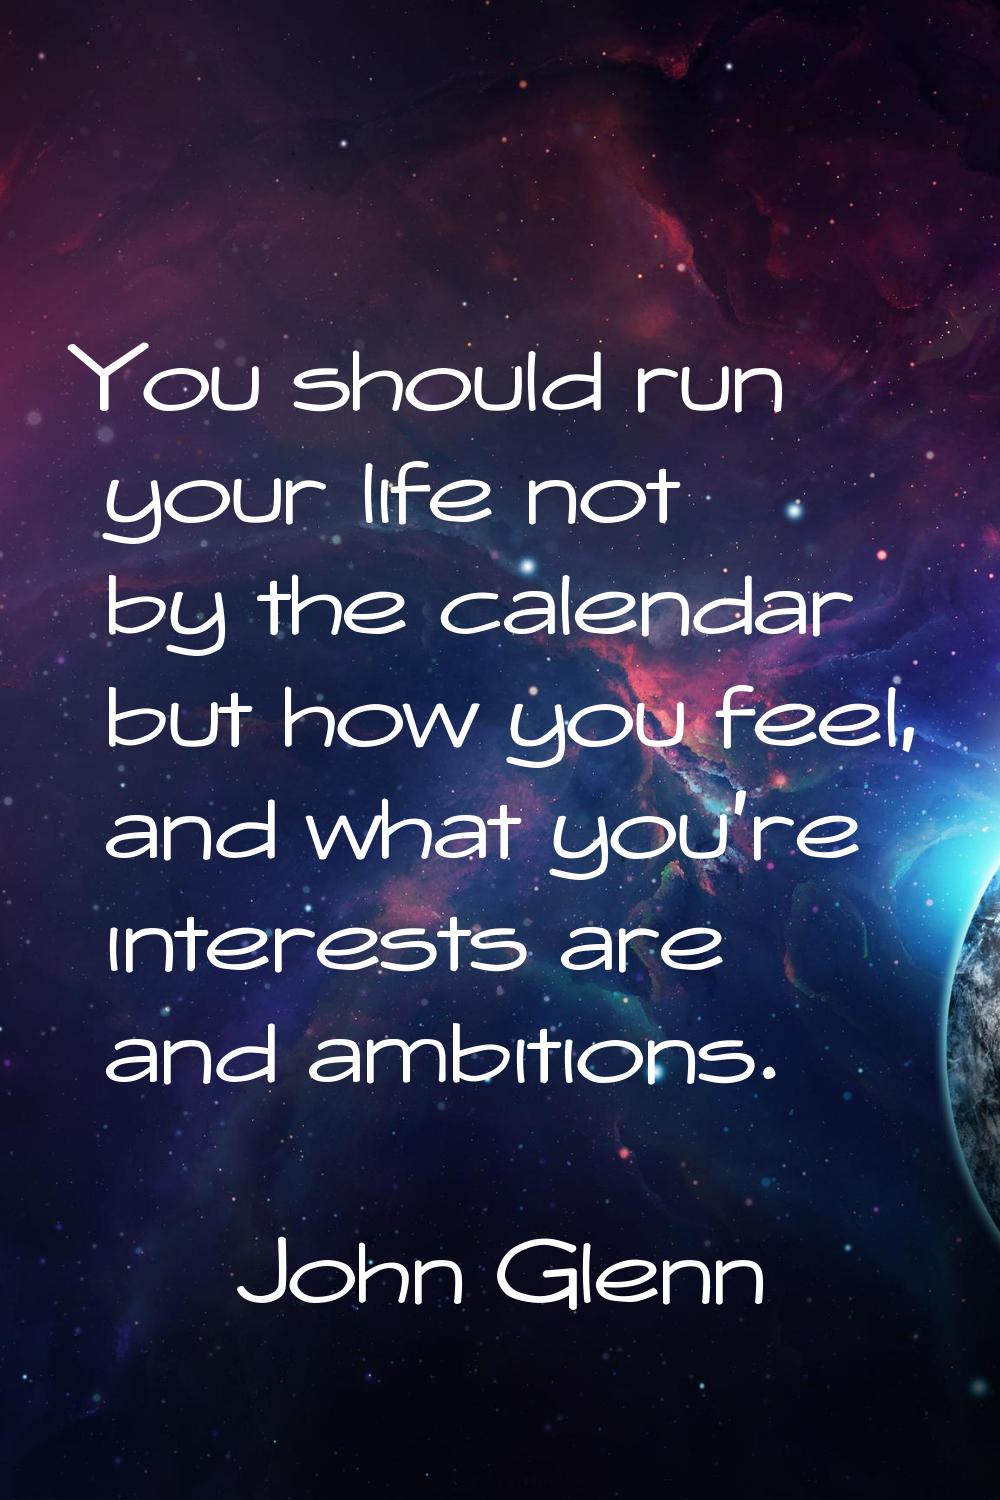 You should run your life not by the calendar but how you feel, and what you're interests are and am